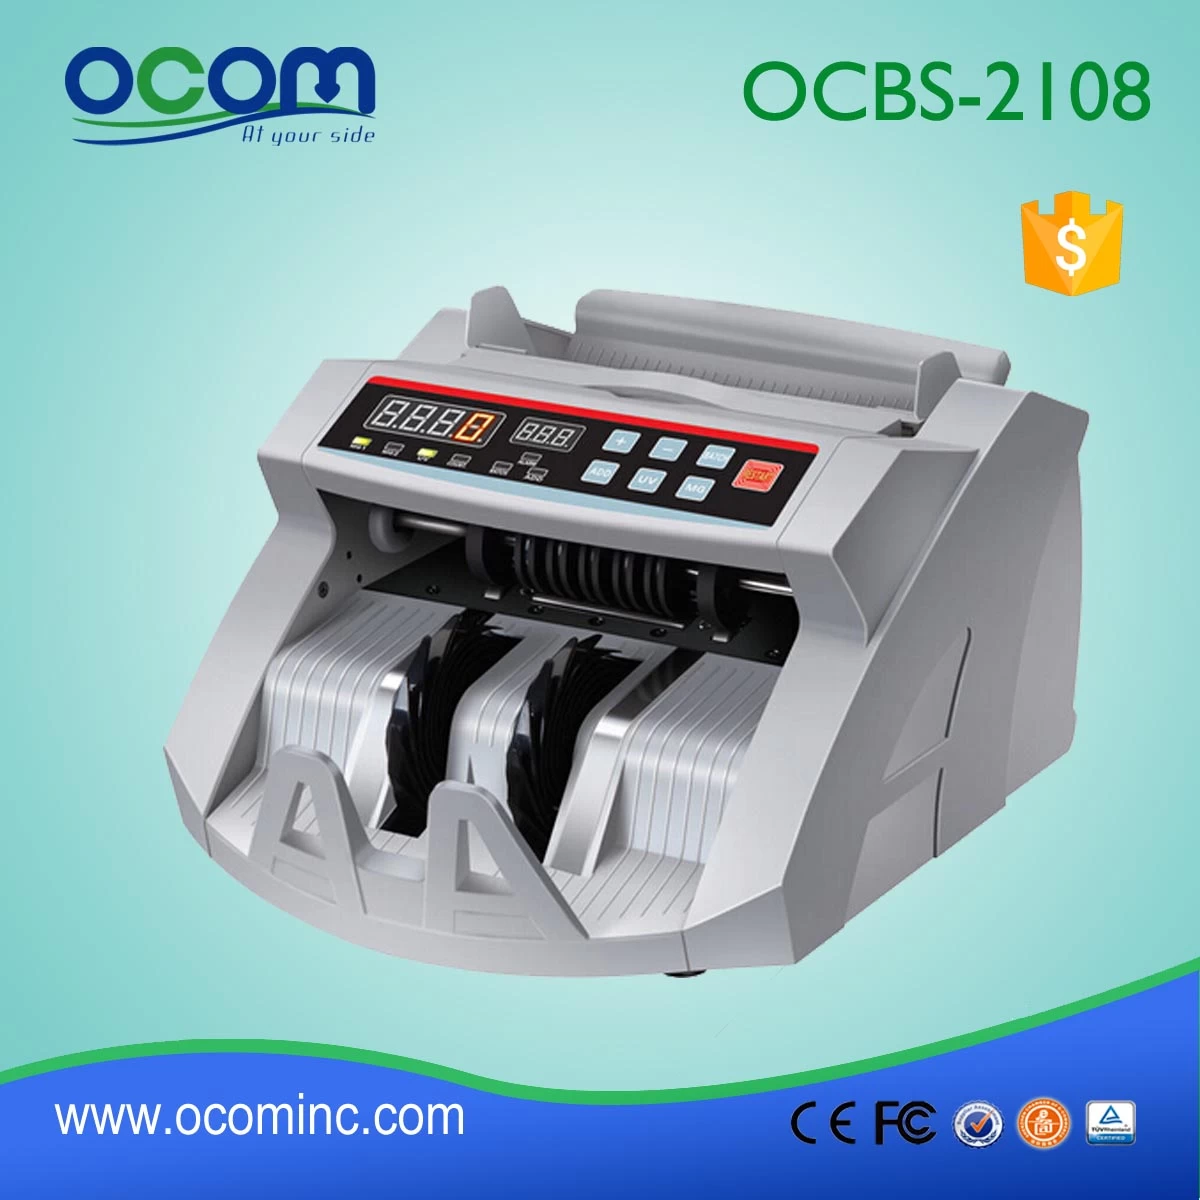 OCBC-2108 Automatic Currency Counting Counter Machine